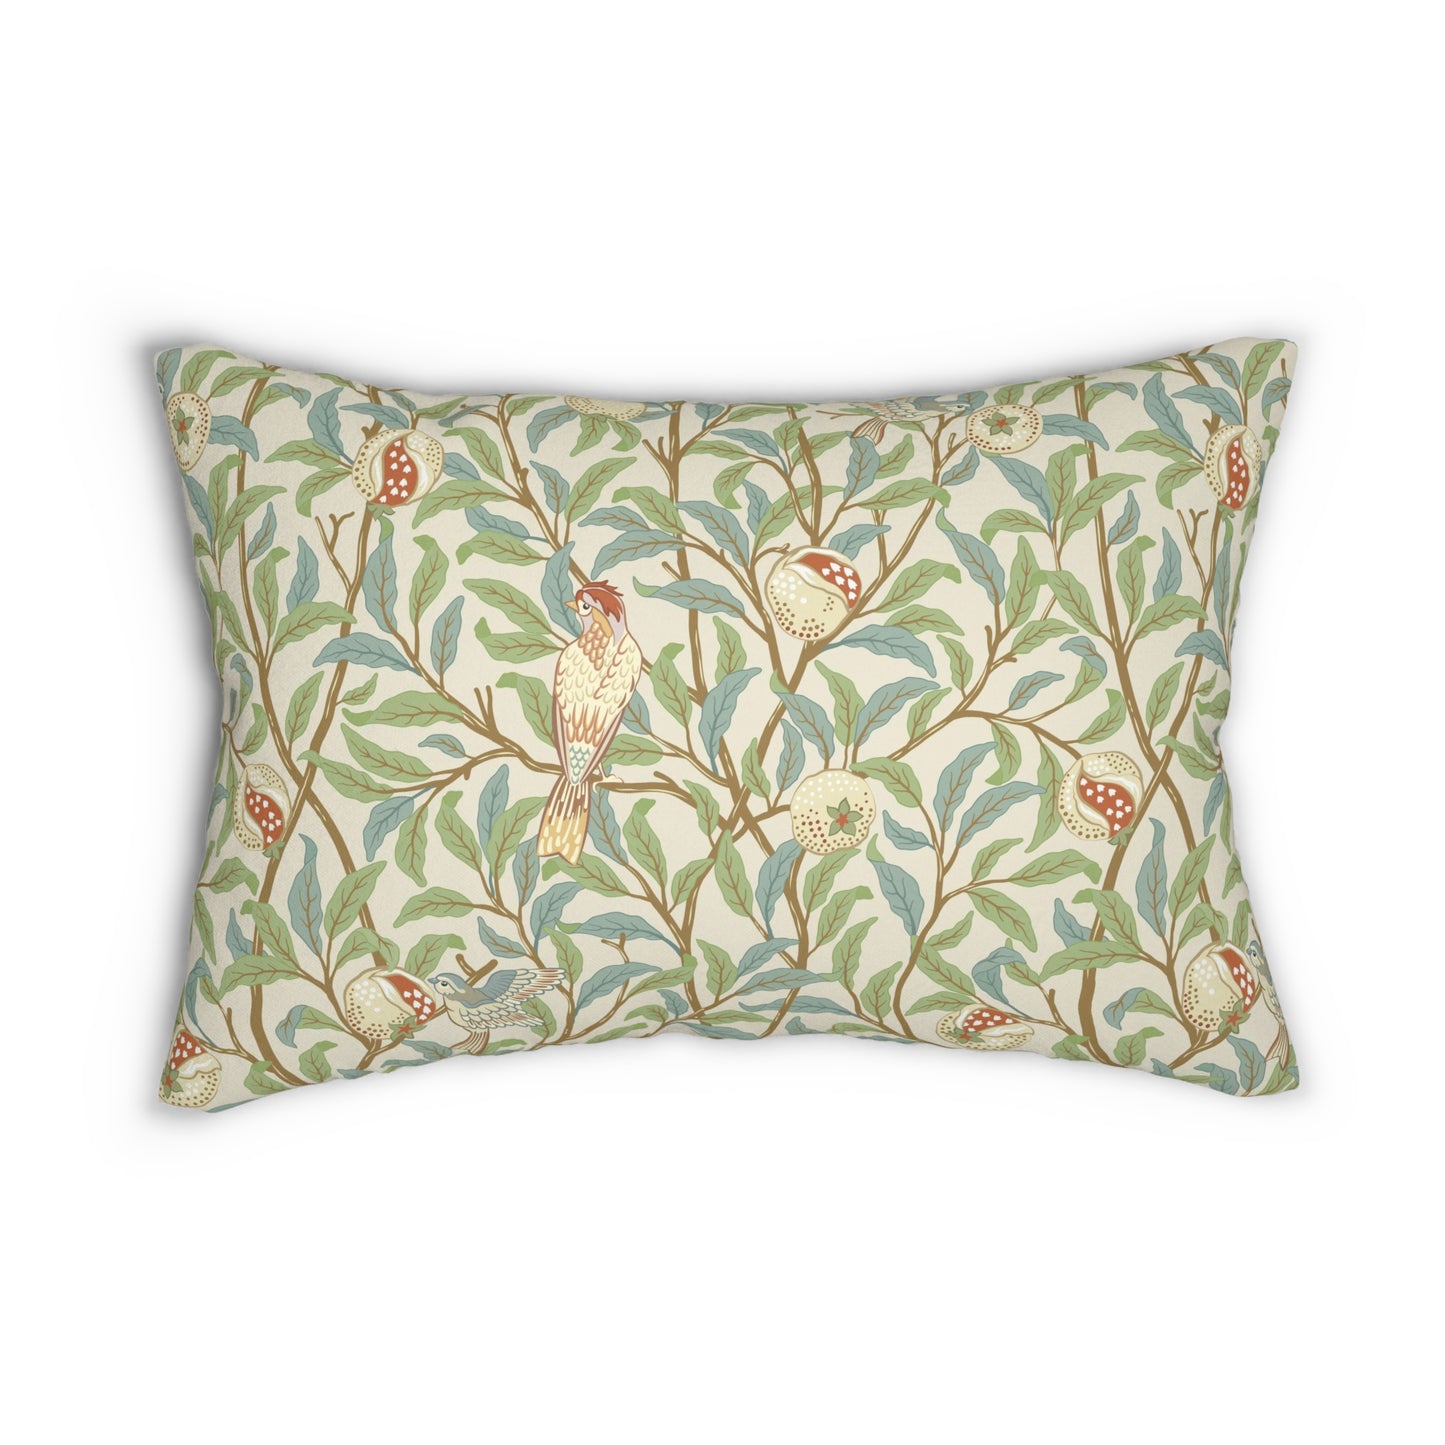 william-morris-co-lumbar-cushion-bird-and-pomegranate-collection-parchment-1